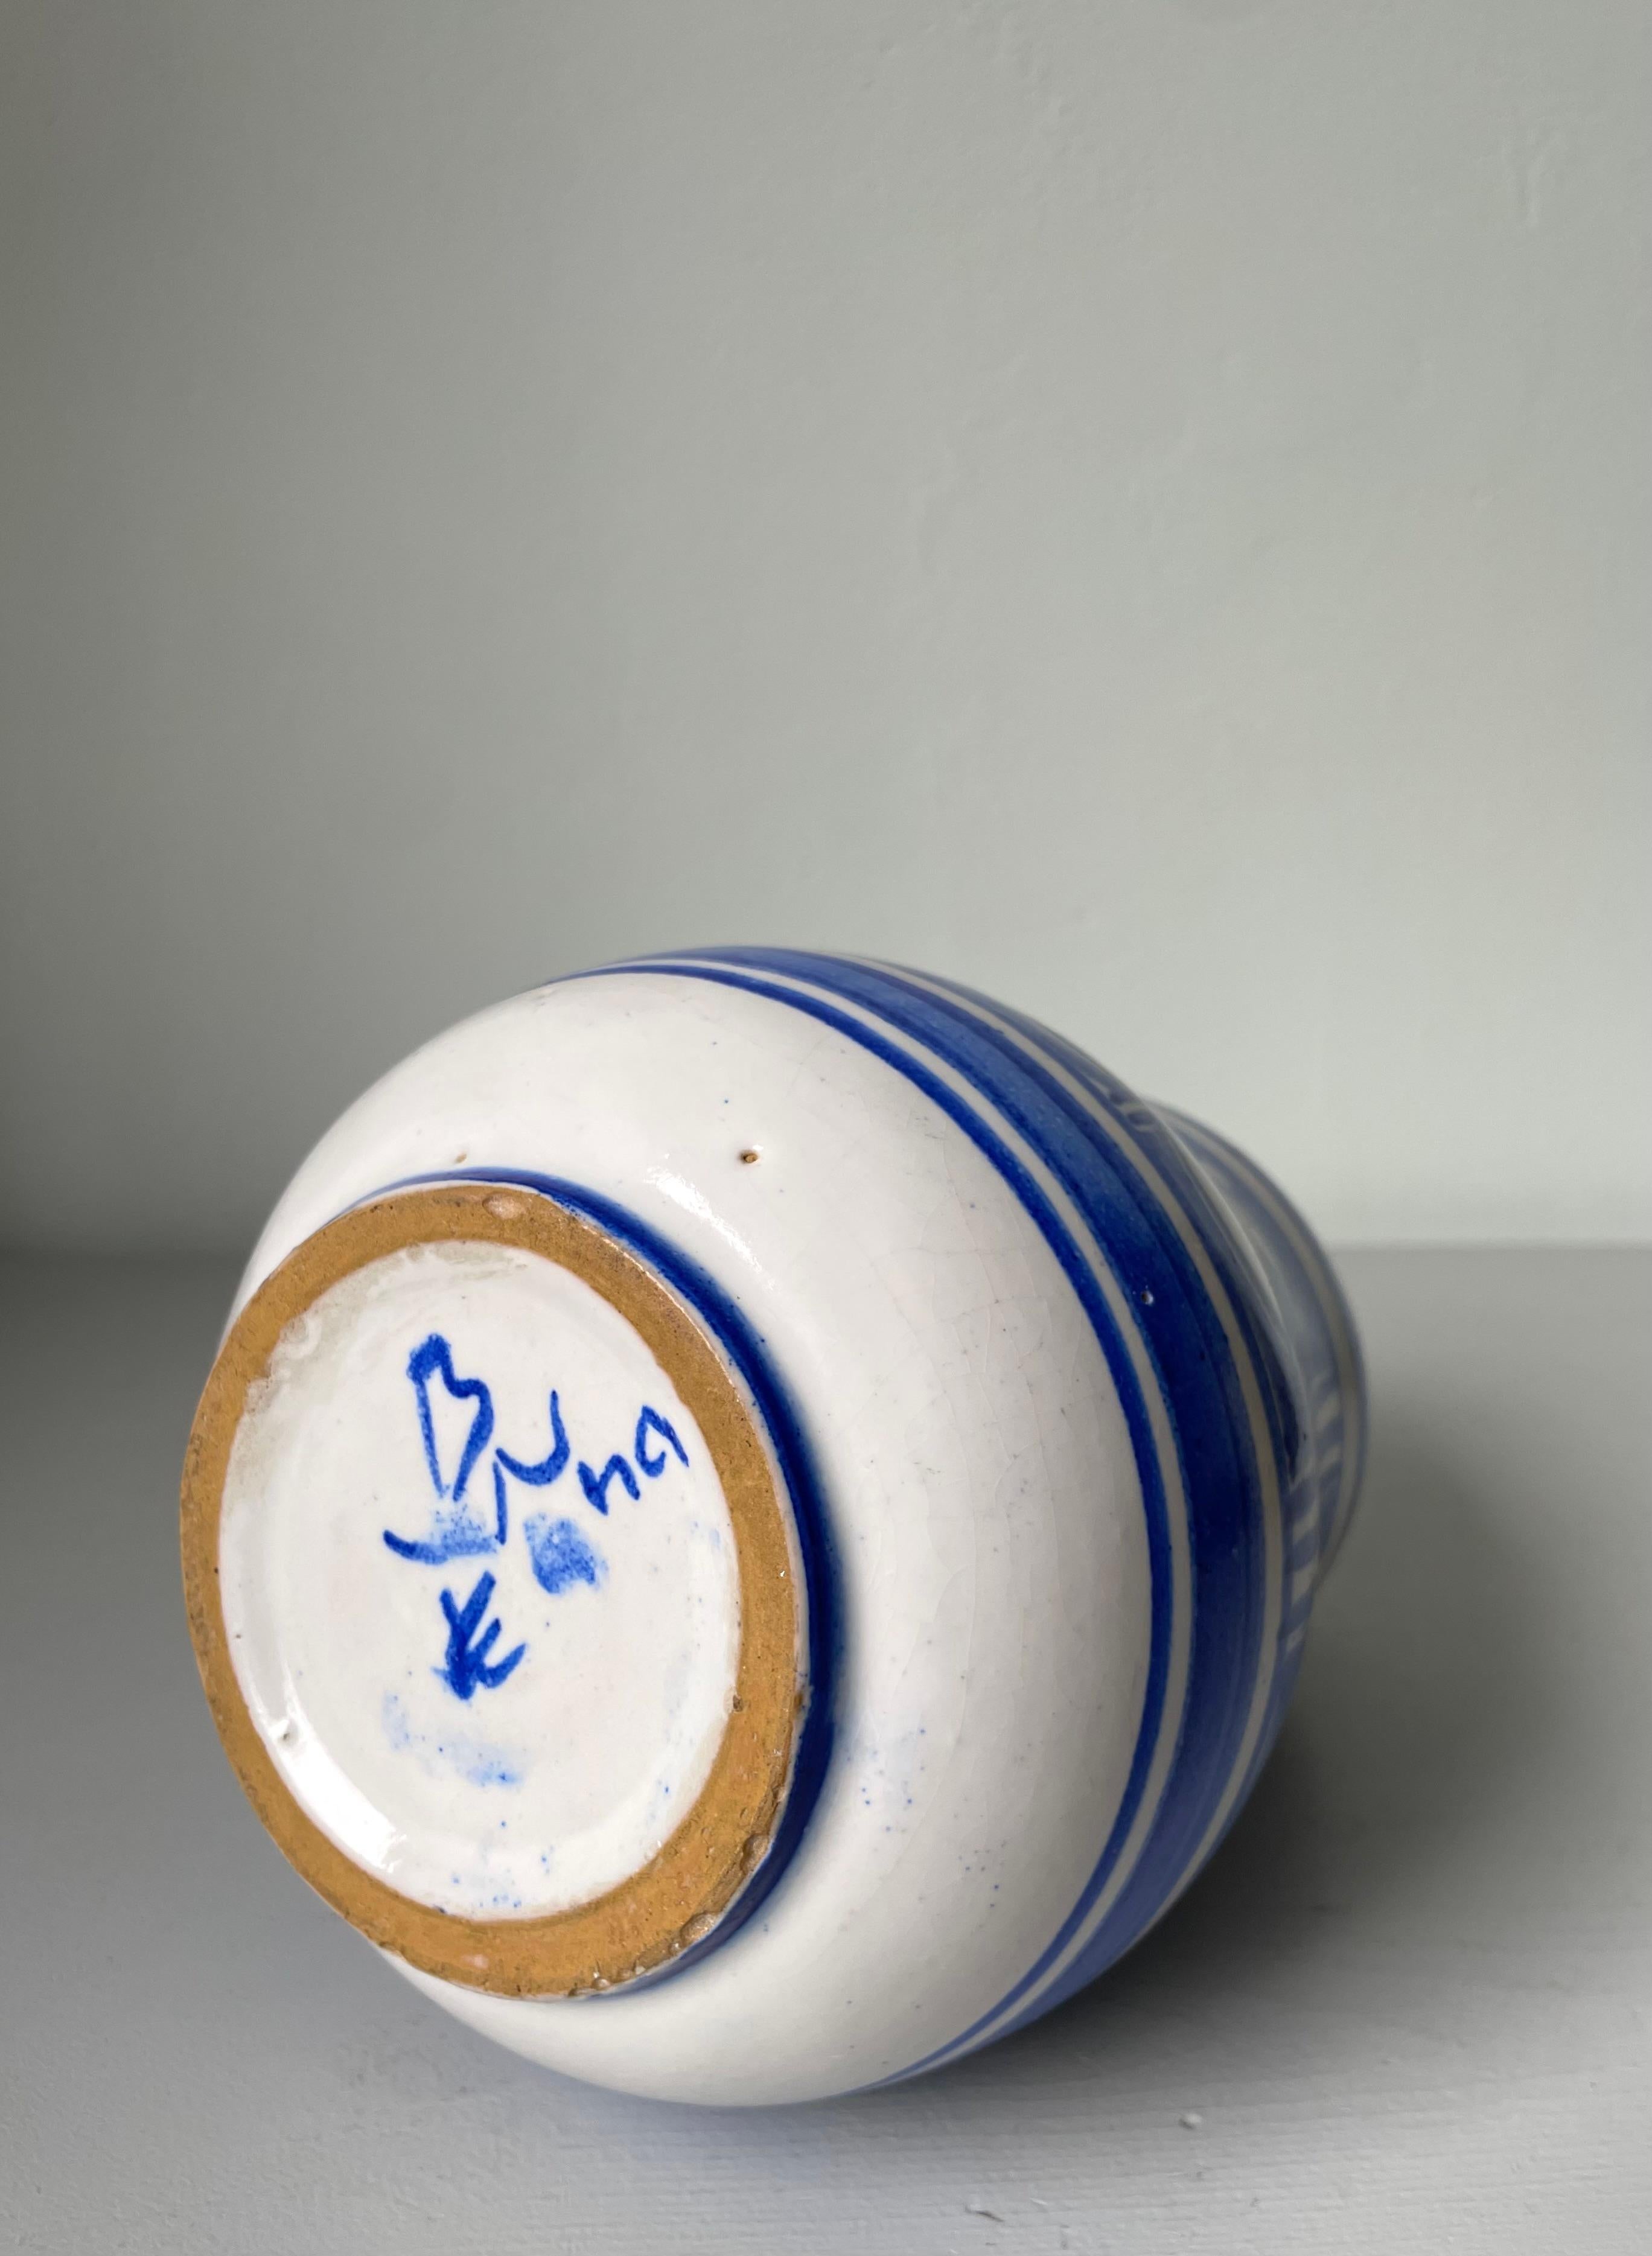 Nordic White Hand-Decorated Blue Floral Ceramic Vase, 1950s For Sale 8